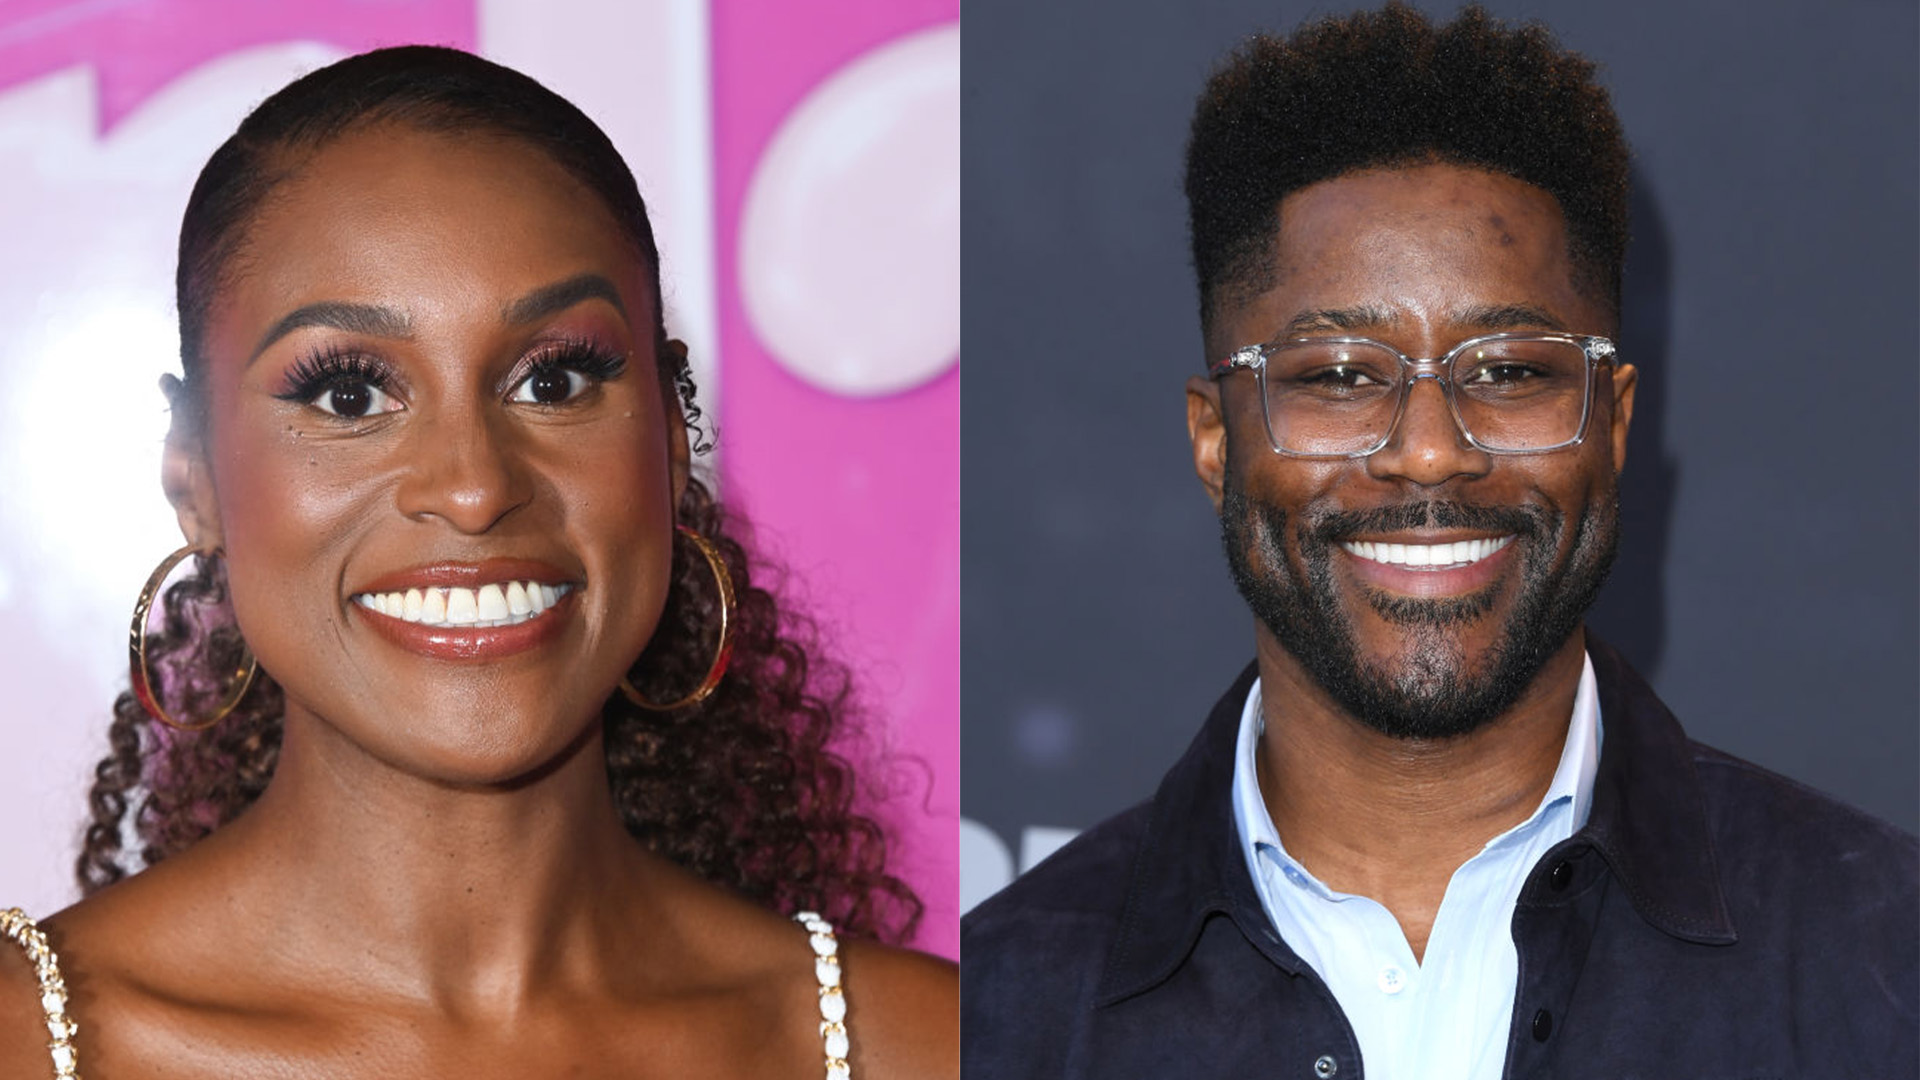 Op-Ed: 3 Lessons I Learned About The Black Entrepreneurial Journey From Issa Rae And Nate Burleson